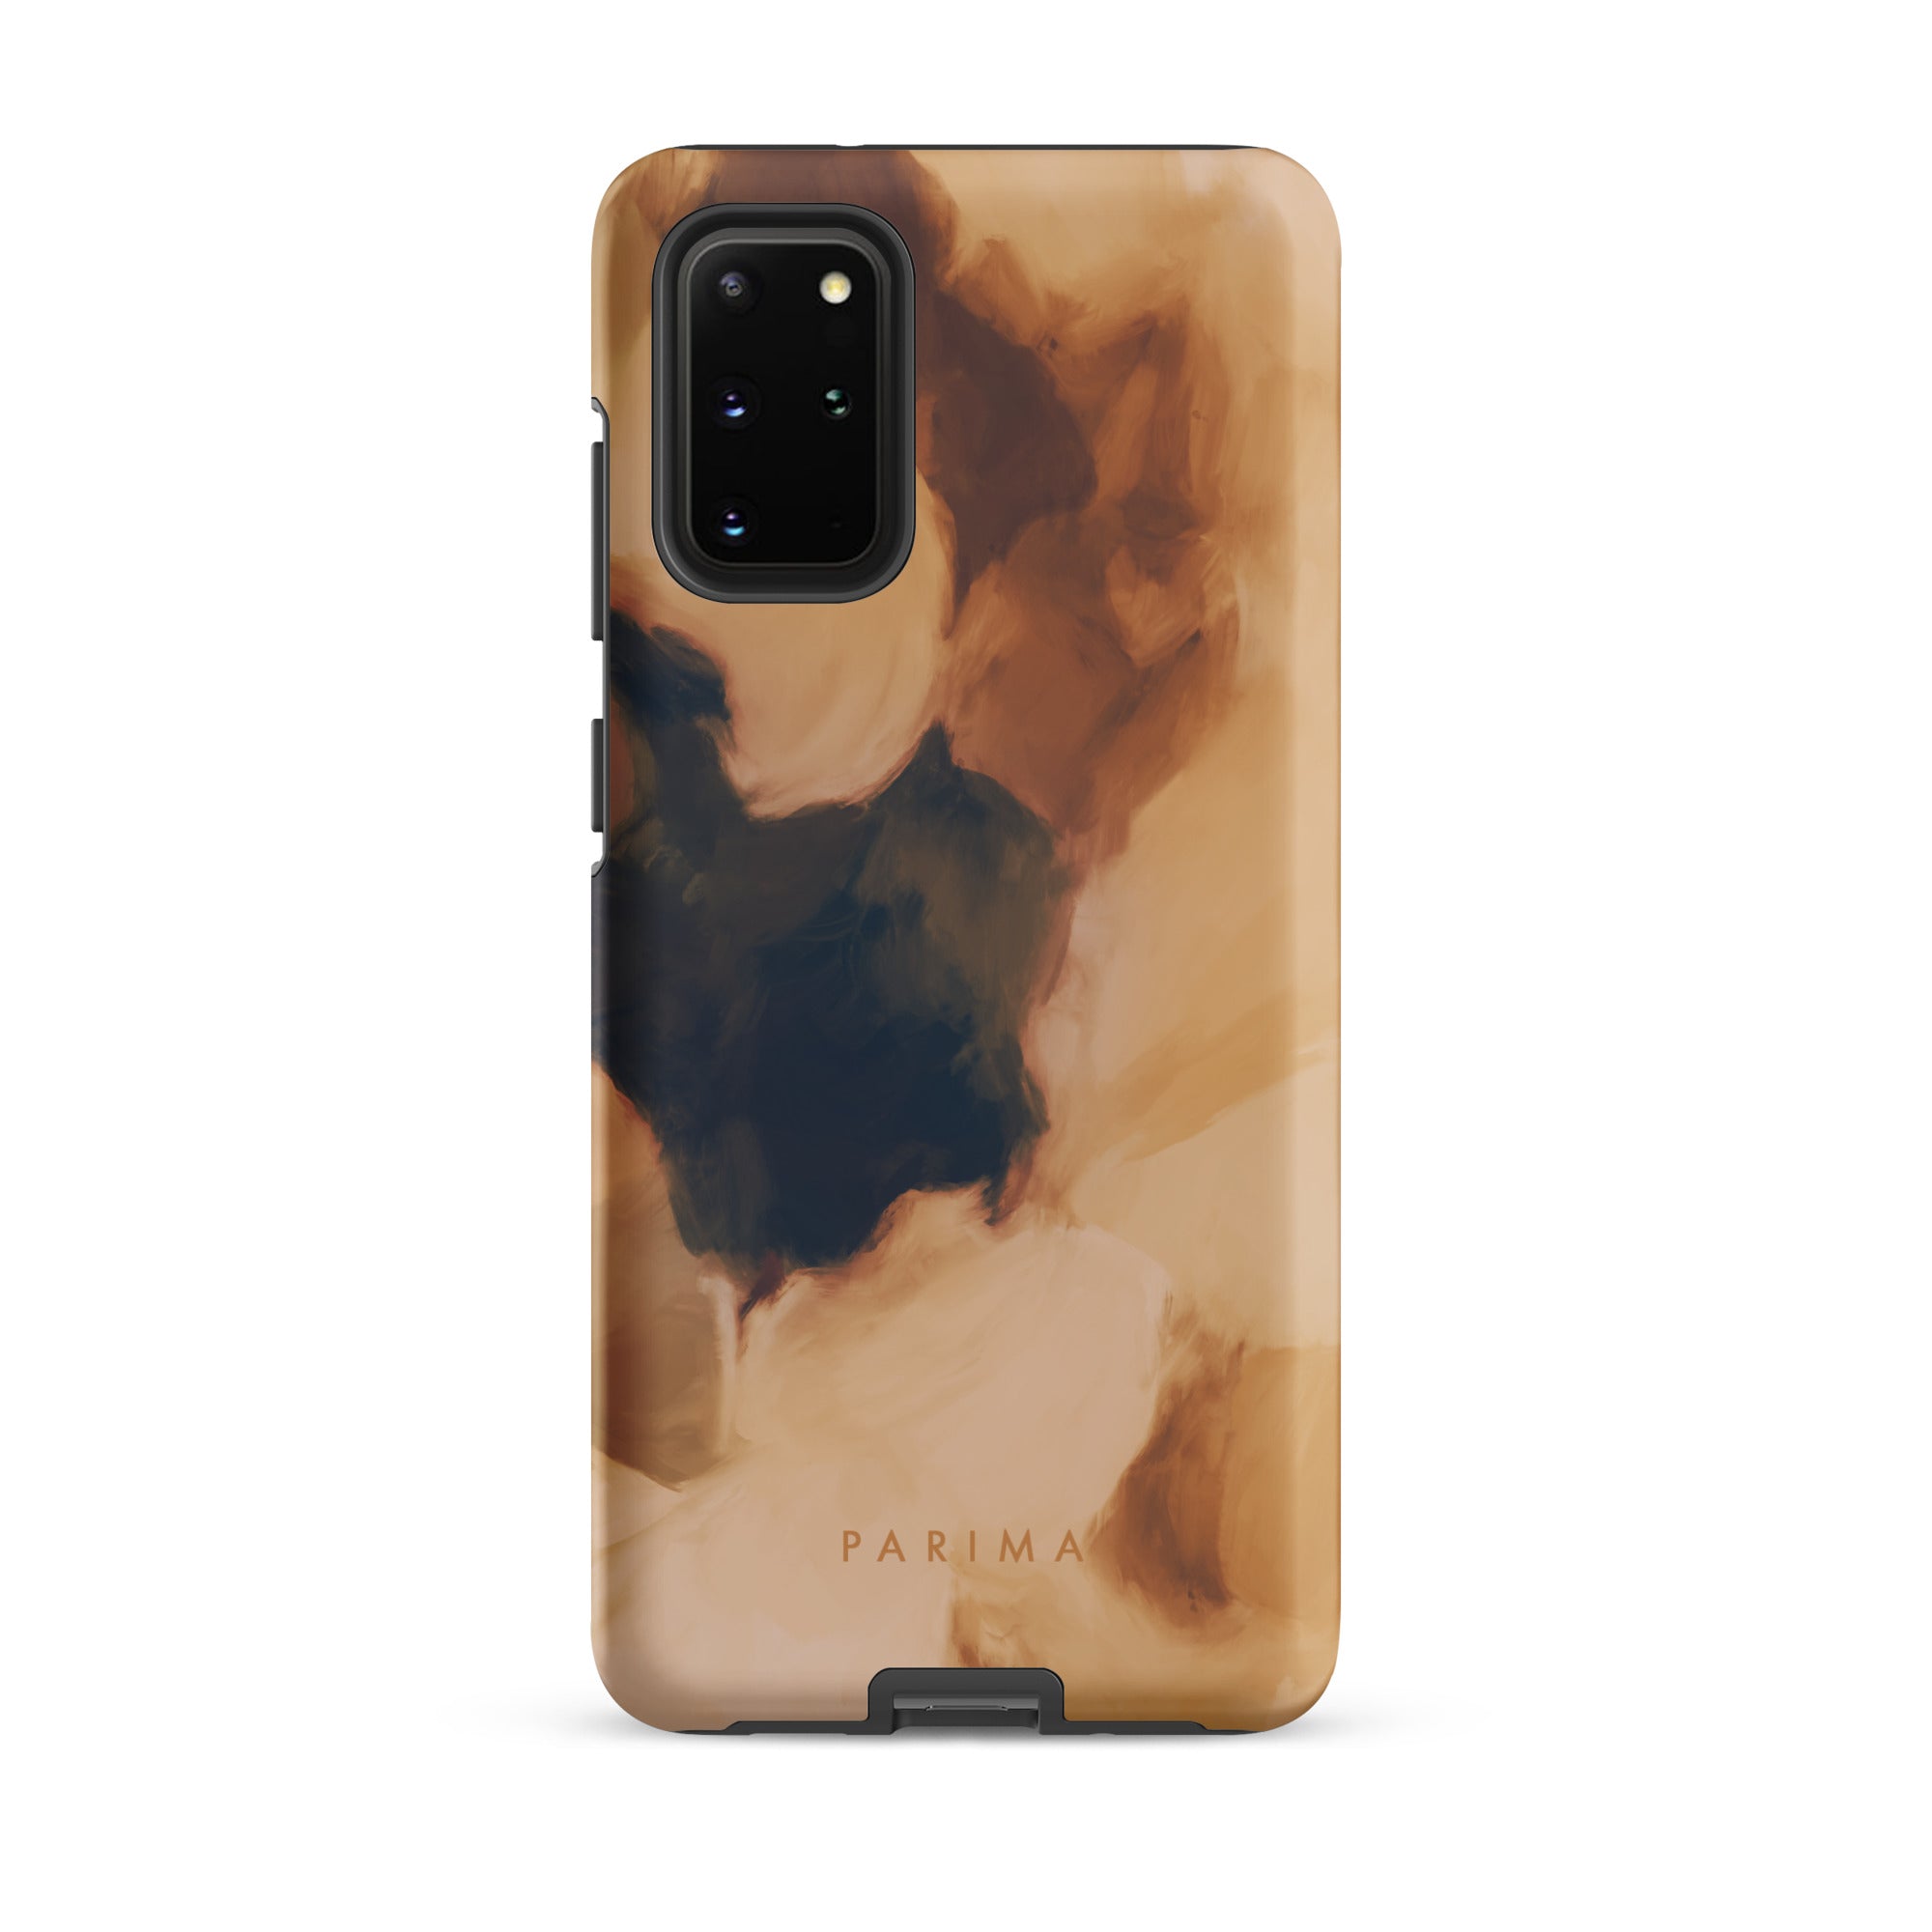 Clay, brown and tan color abstract art on Samsung Galaxy s20 Plus tough case by Parima Studio